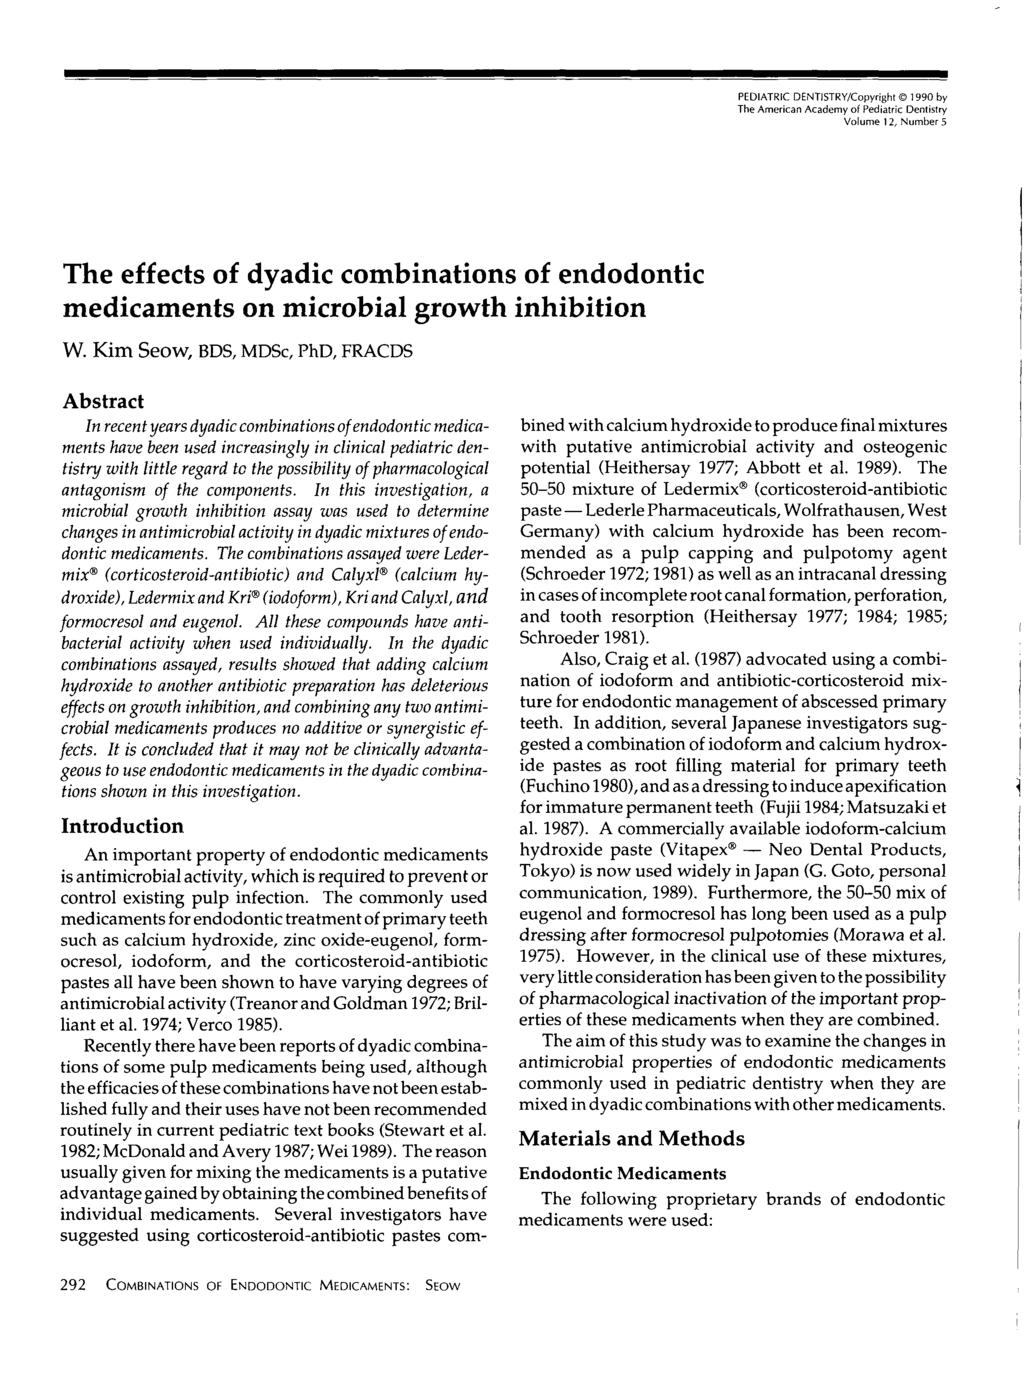 PEDIATRIC DENTISTRY/Copyright 1990 by The American Academy of Pediatric Dentistry Volume 12, Number 5 The effects of dyadic combinations of endodontic medicaments on microbial growth inhibition W.